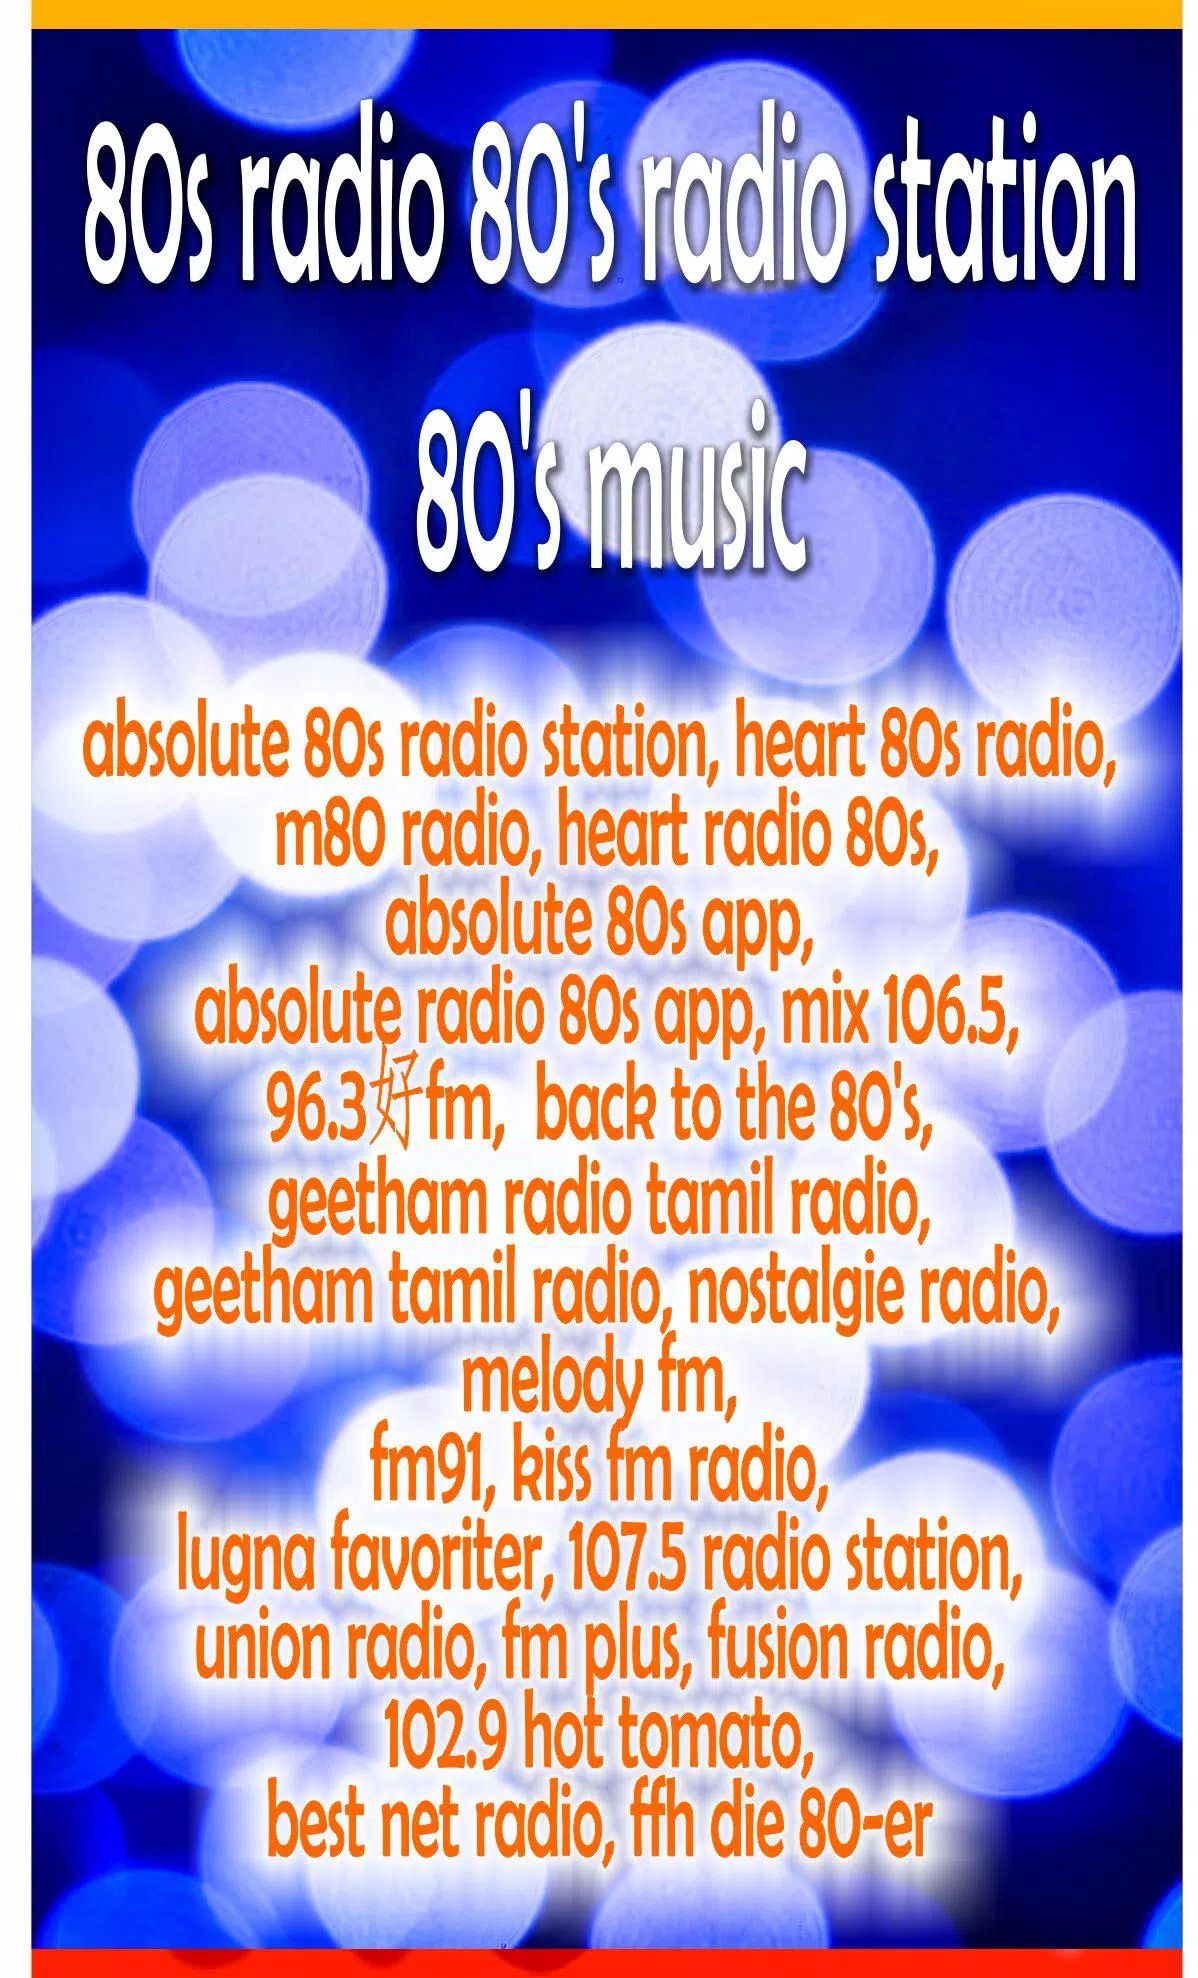 80s radio 80's radio station 80's music for Android - APK Download